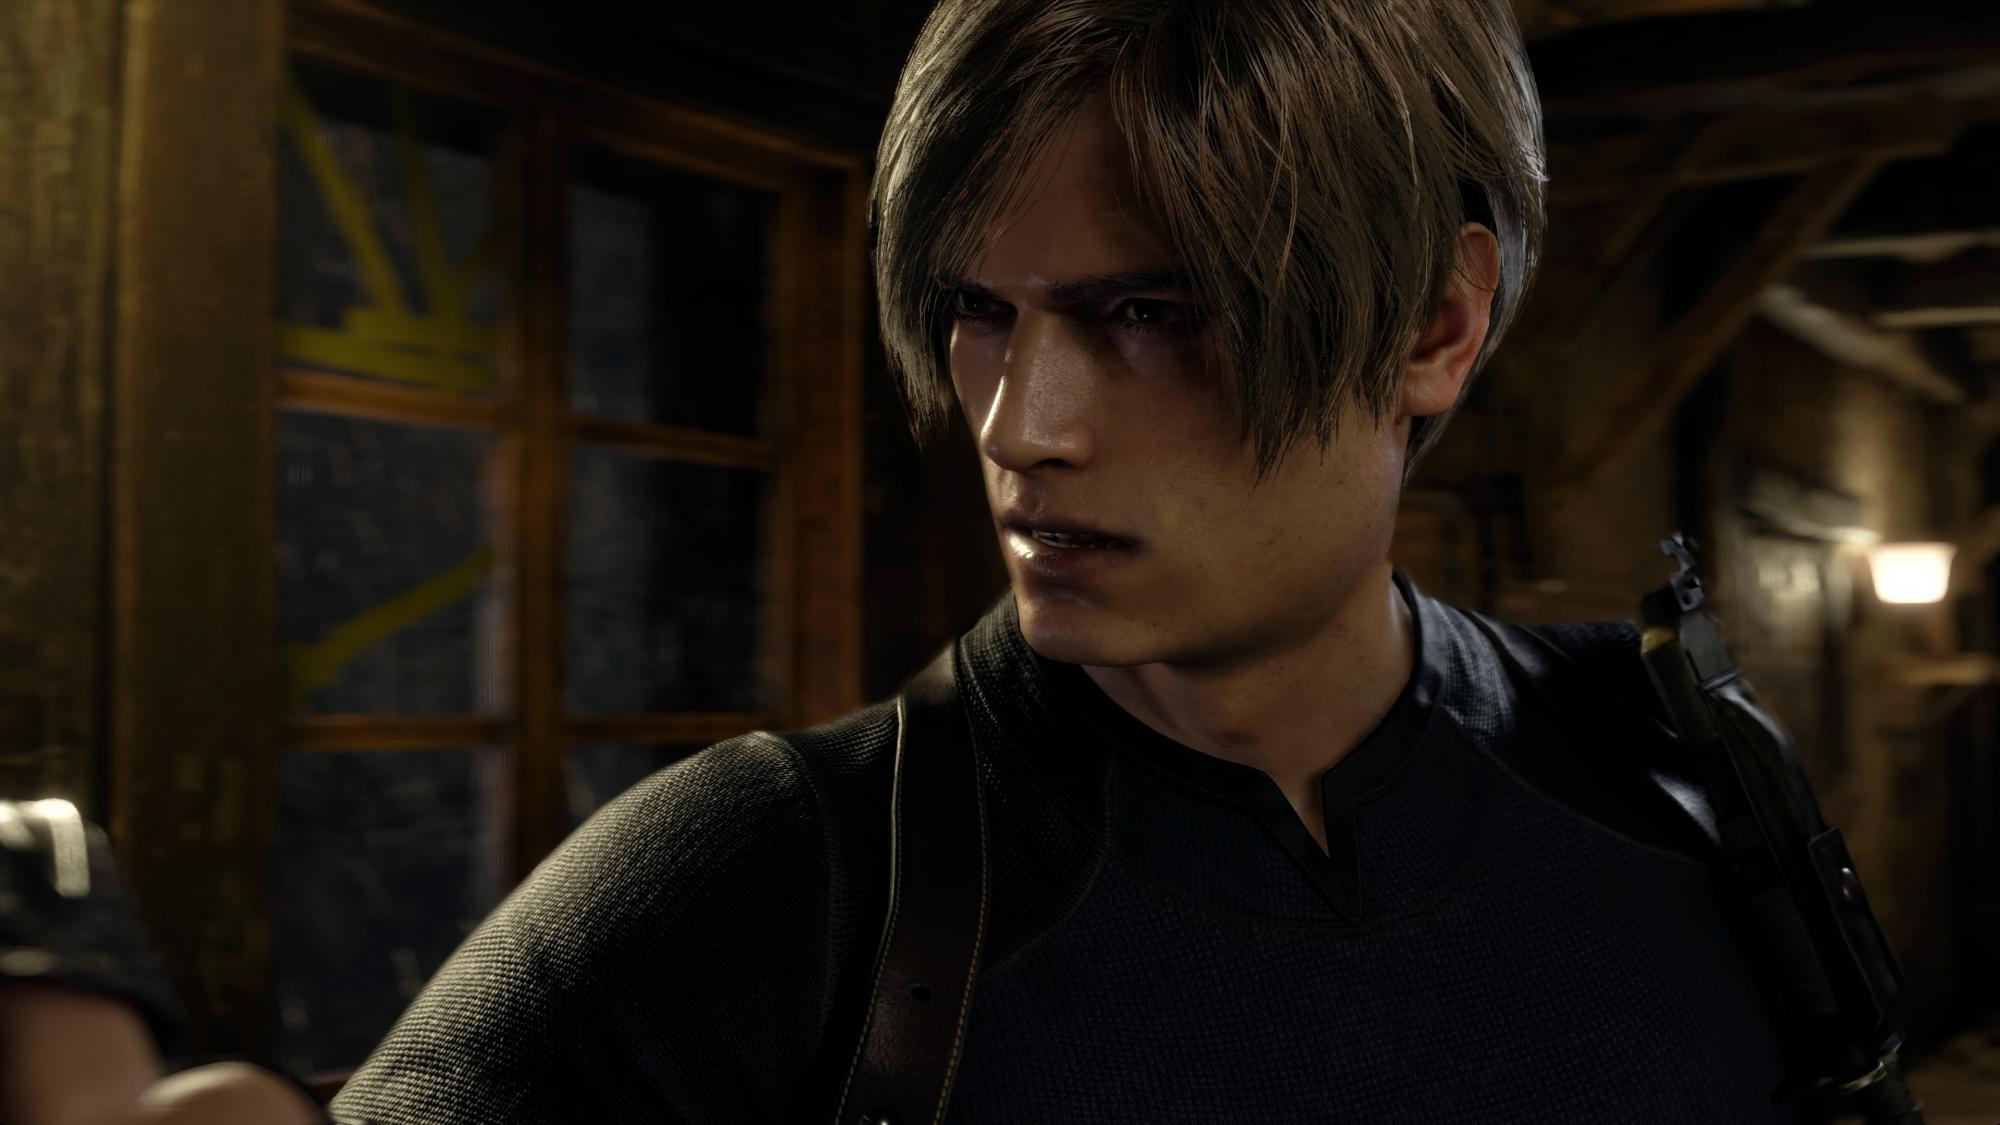 Resident Evil 4 Remake Trainer Features & Download